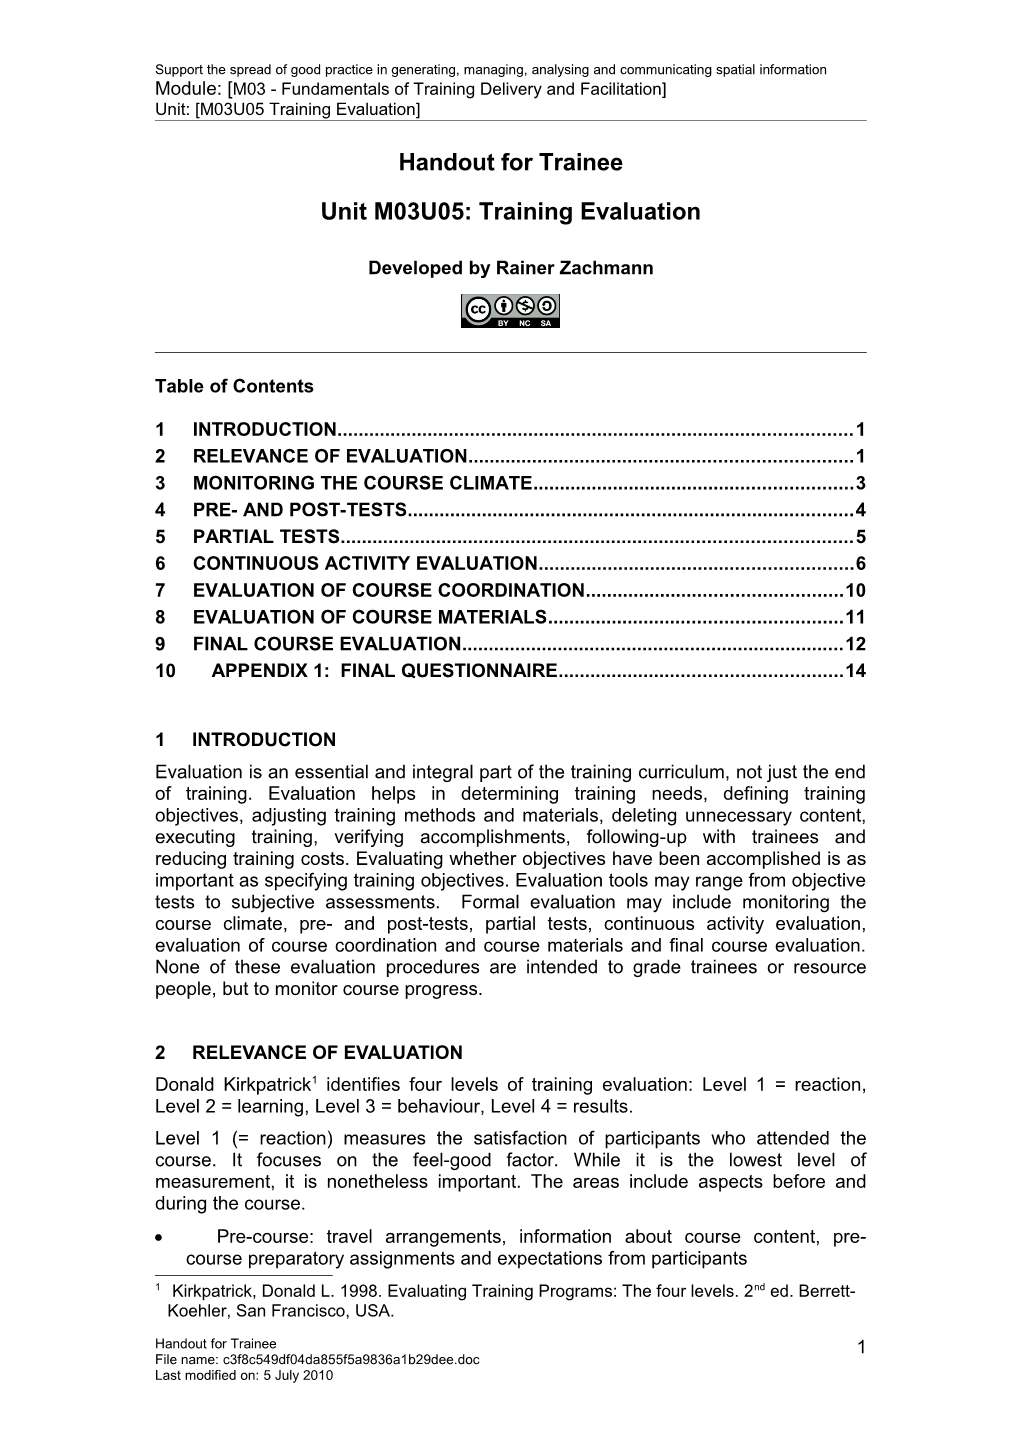 Handout for Trainee - Training Evaluation